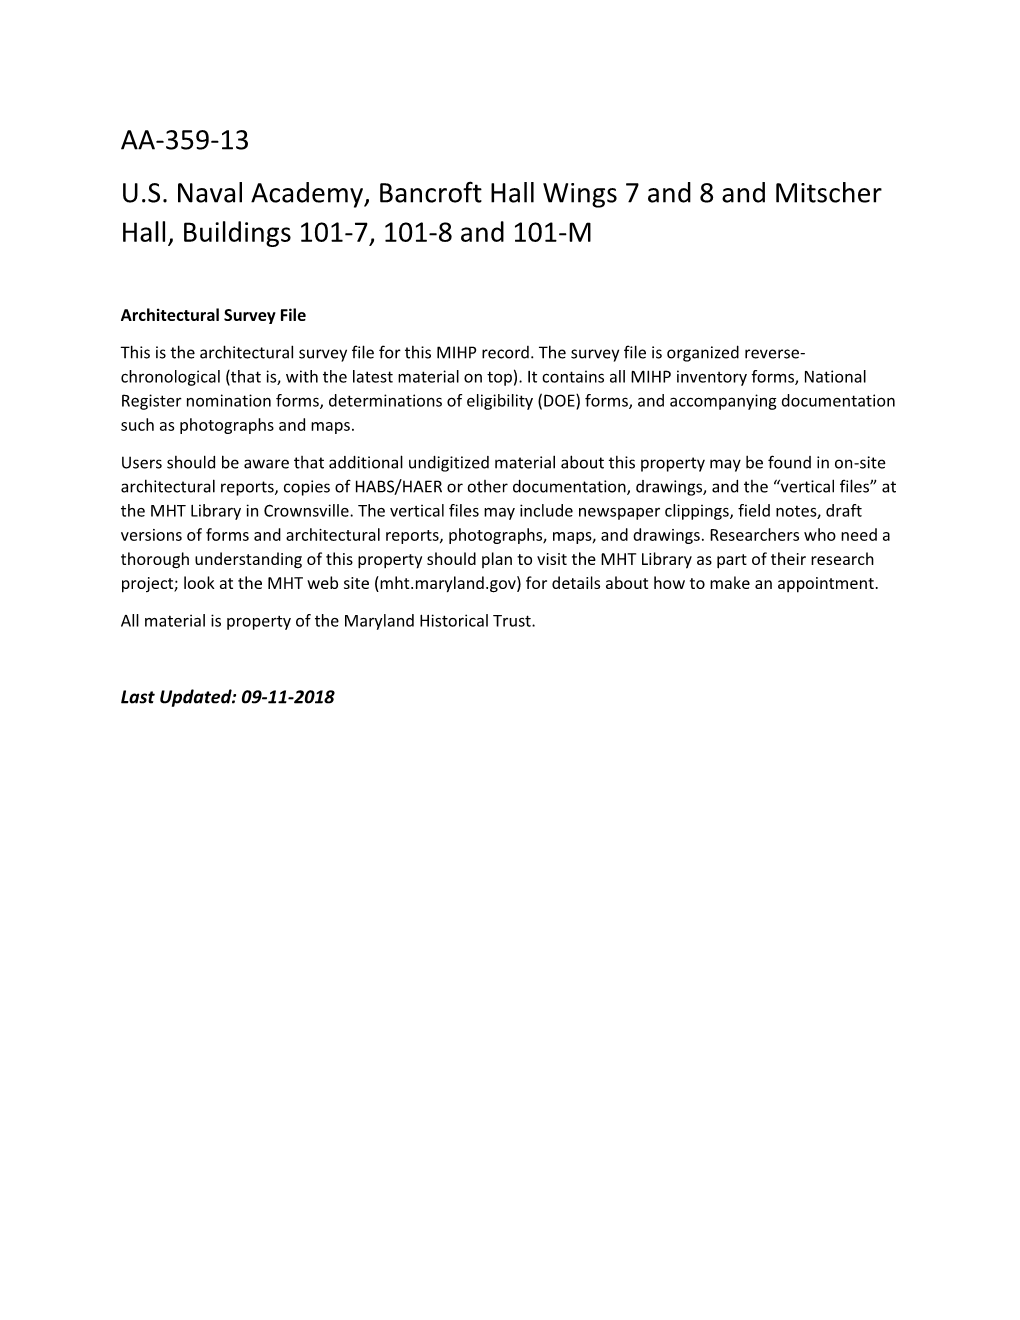 AA-359-13 U.S. Naval Academy, Bancroft Hall Wings 7 and 8 and Mitscher Hall, Buildings 101-7, 101-8 and 101-M